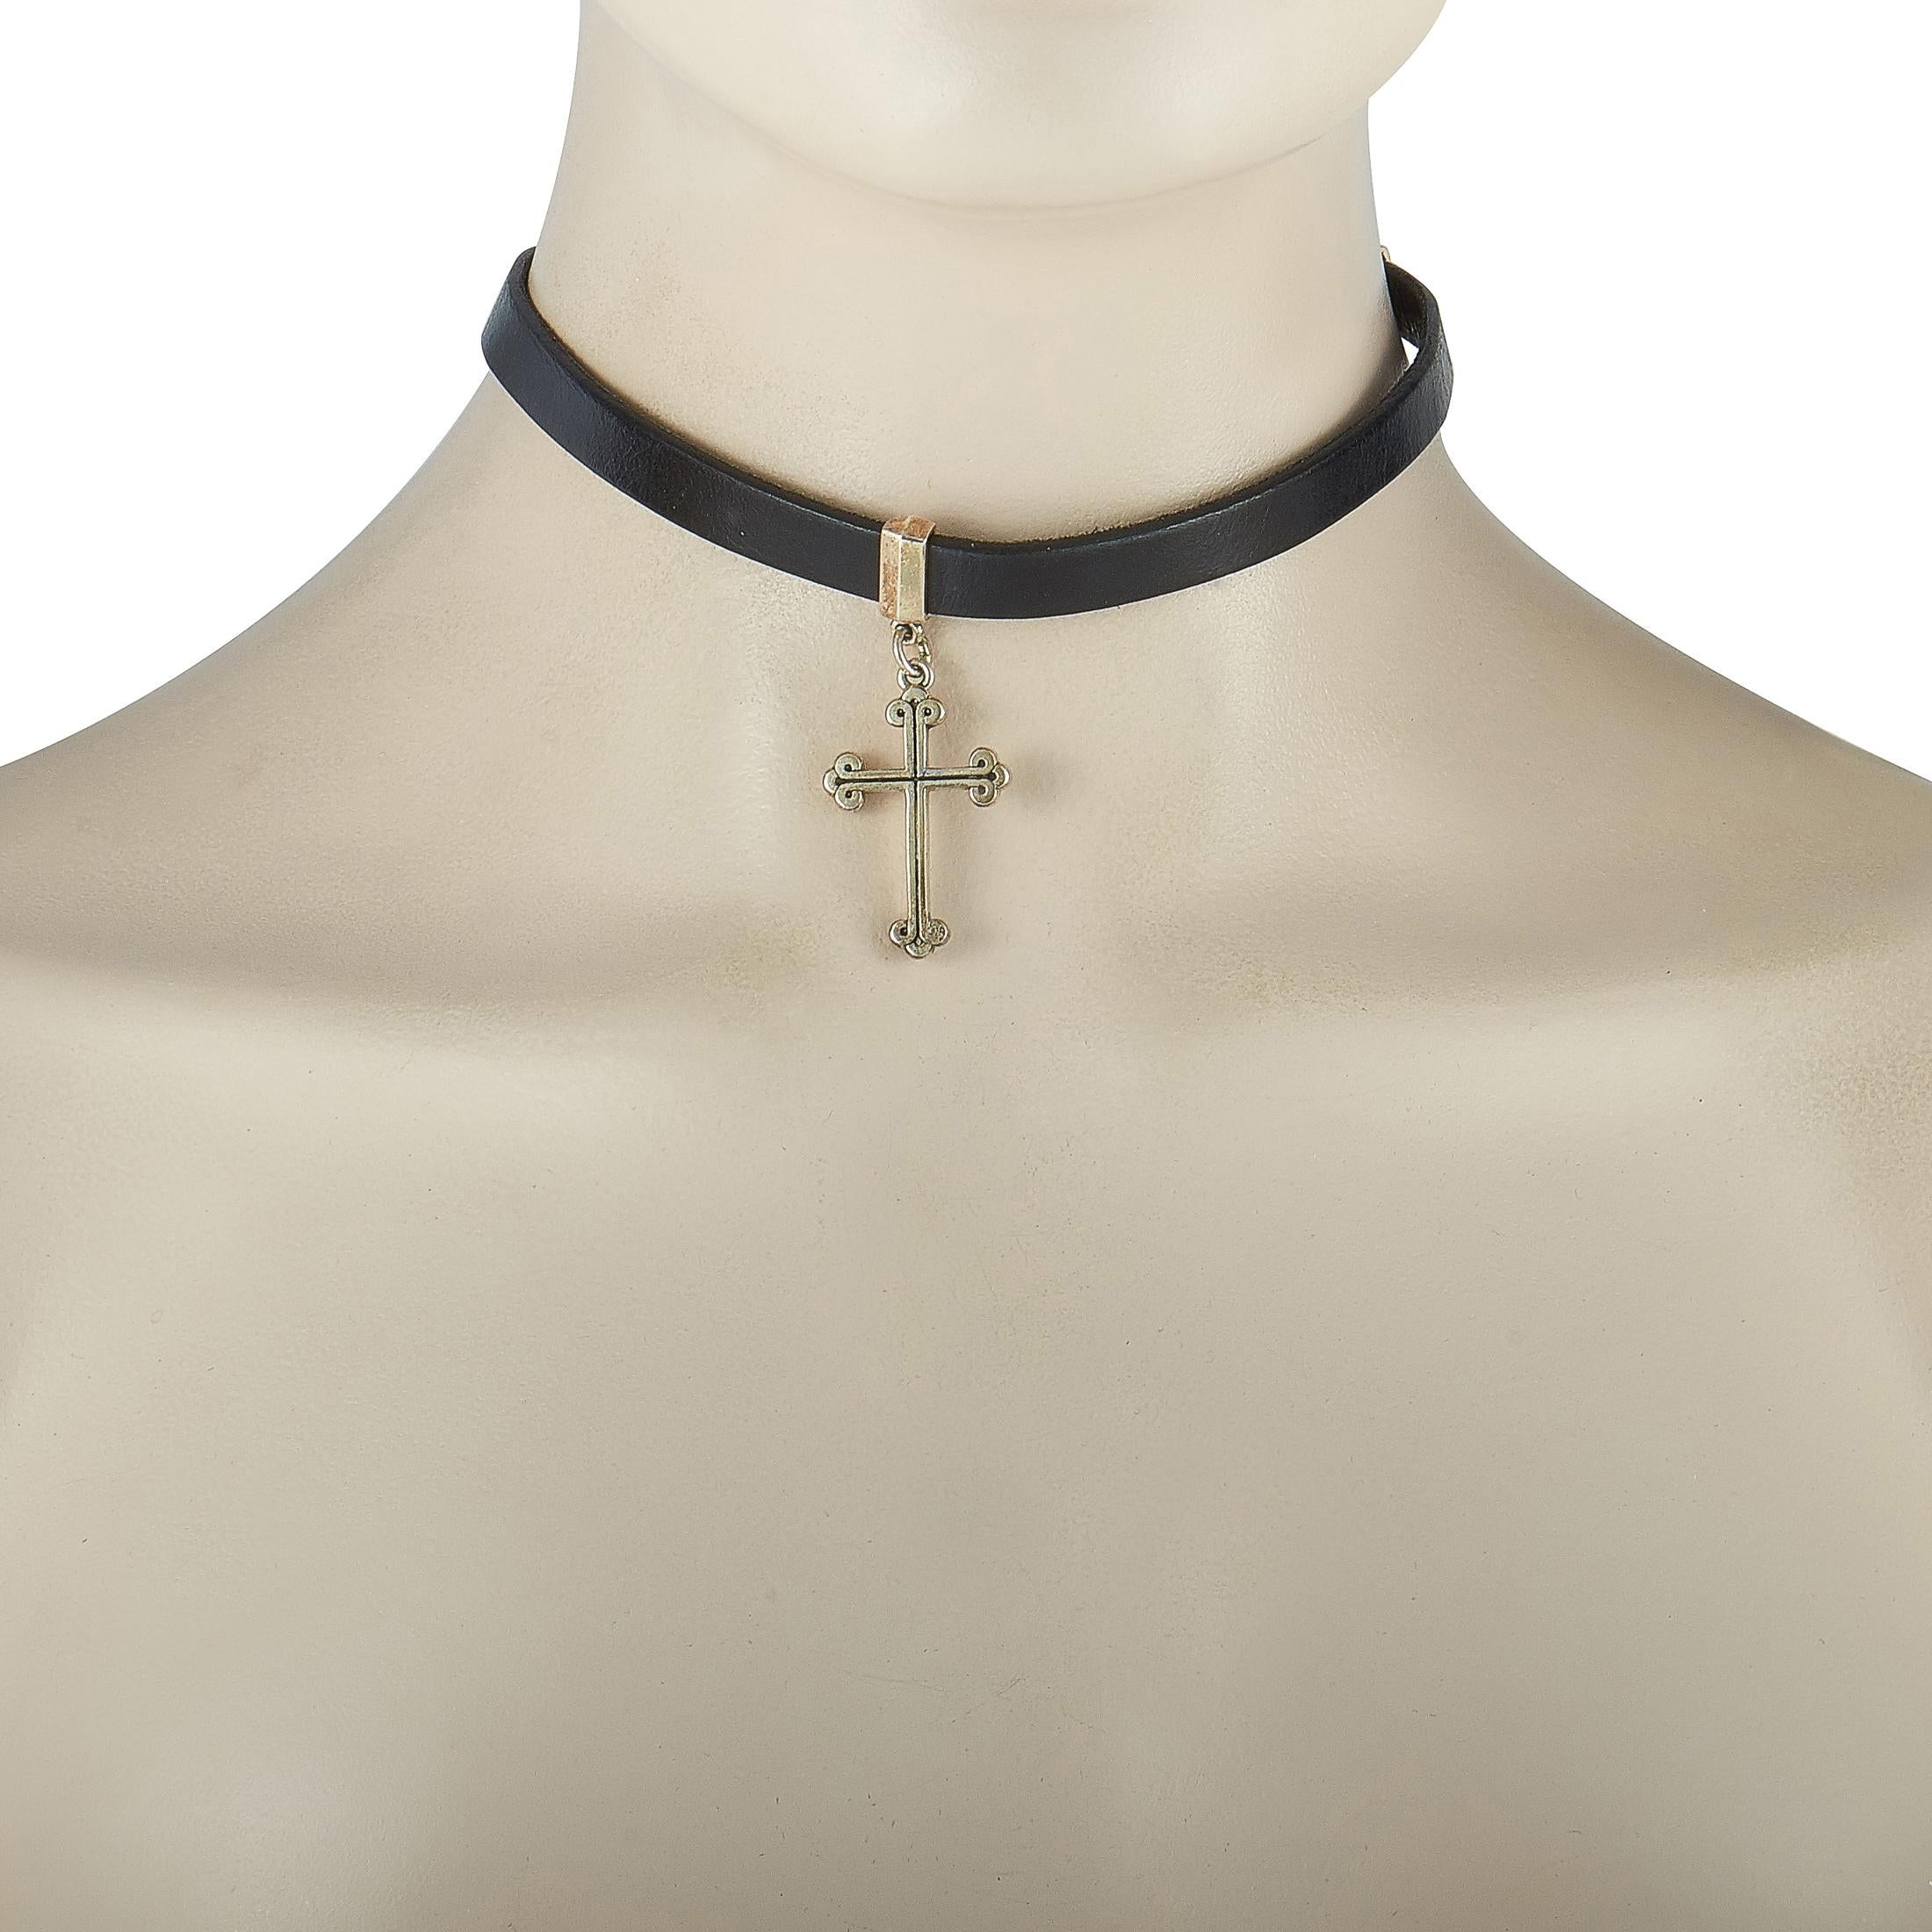 This King Baby choker necklace is made out of sterling silver and black leather and weighs 23.7 grams. The necklace measures 13” in length and boasts a cross pendant that measures 2” in length and 0.75” in width.

Offered in brand new condition,